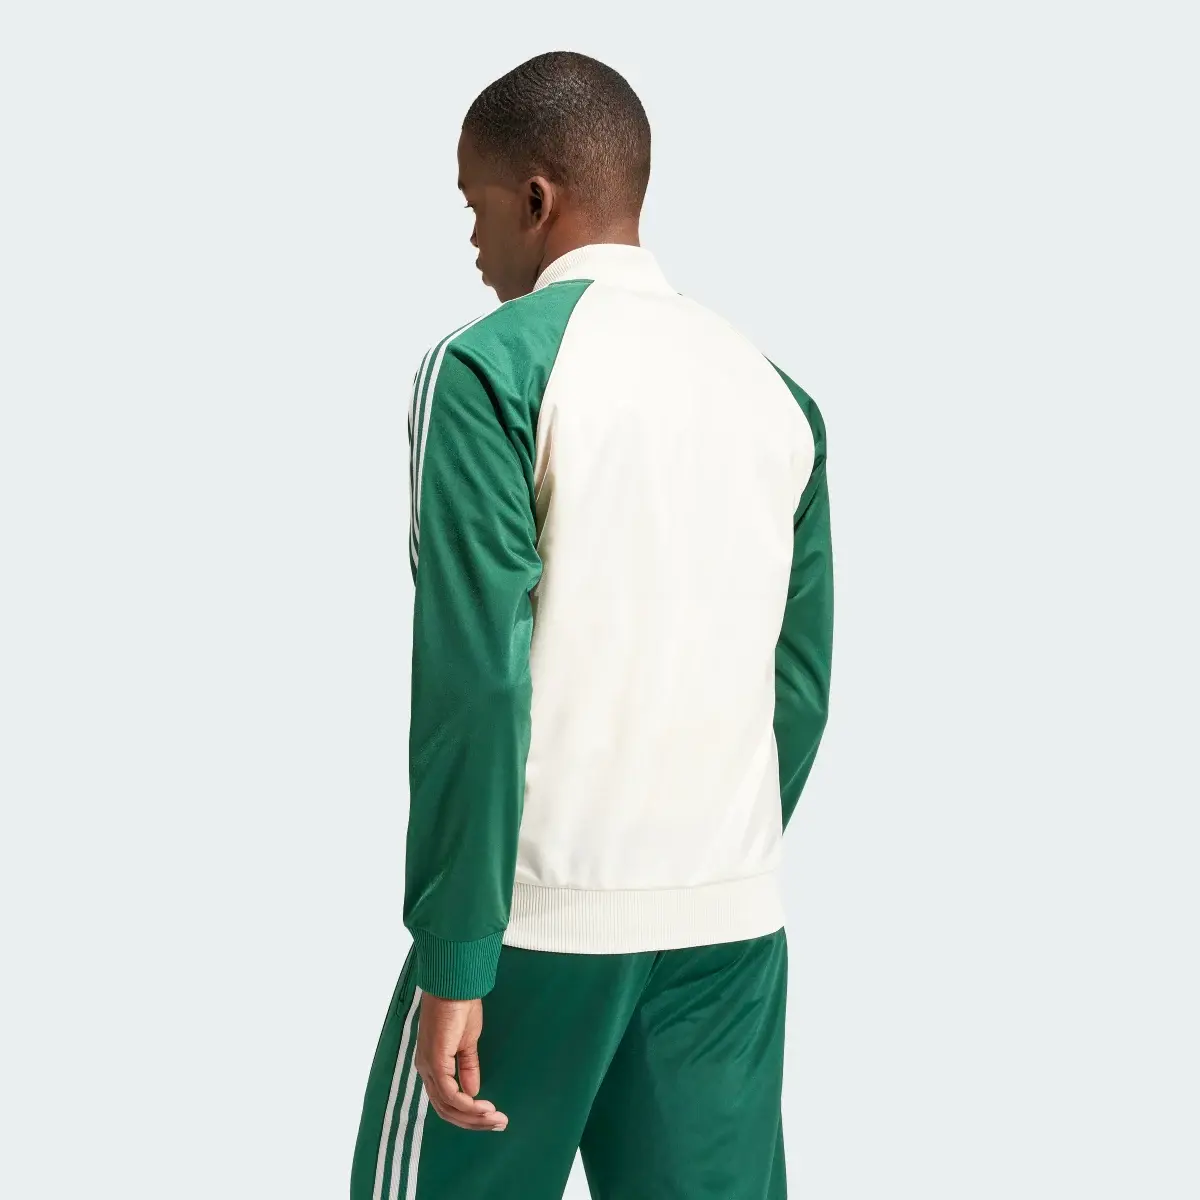 Adidas SST Track Top. 3